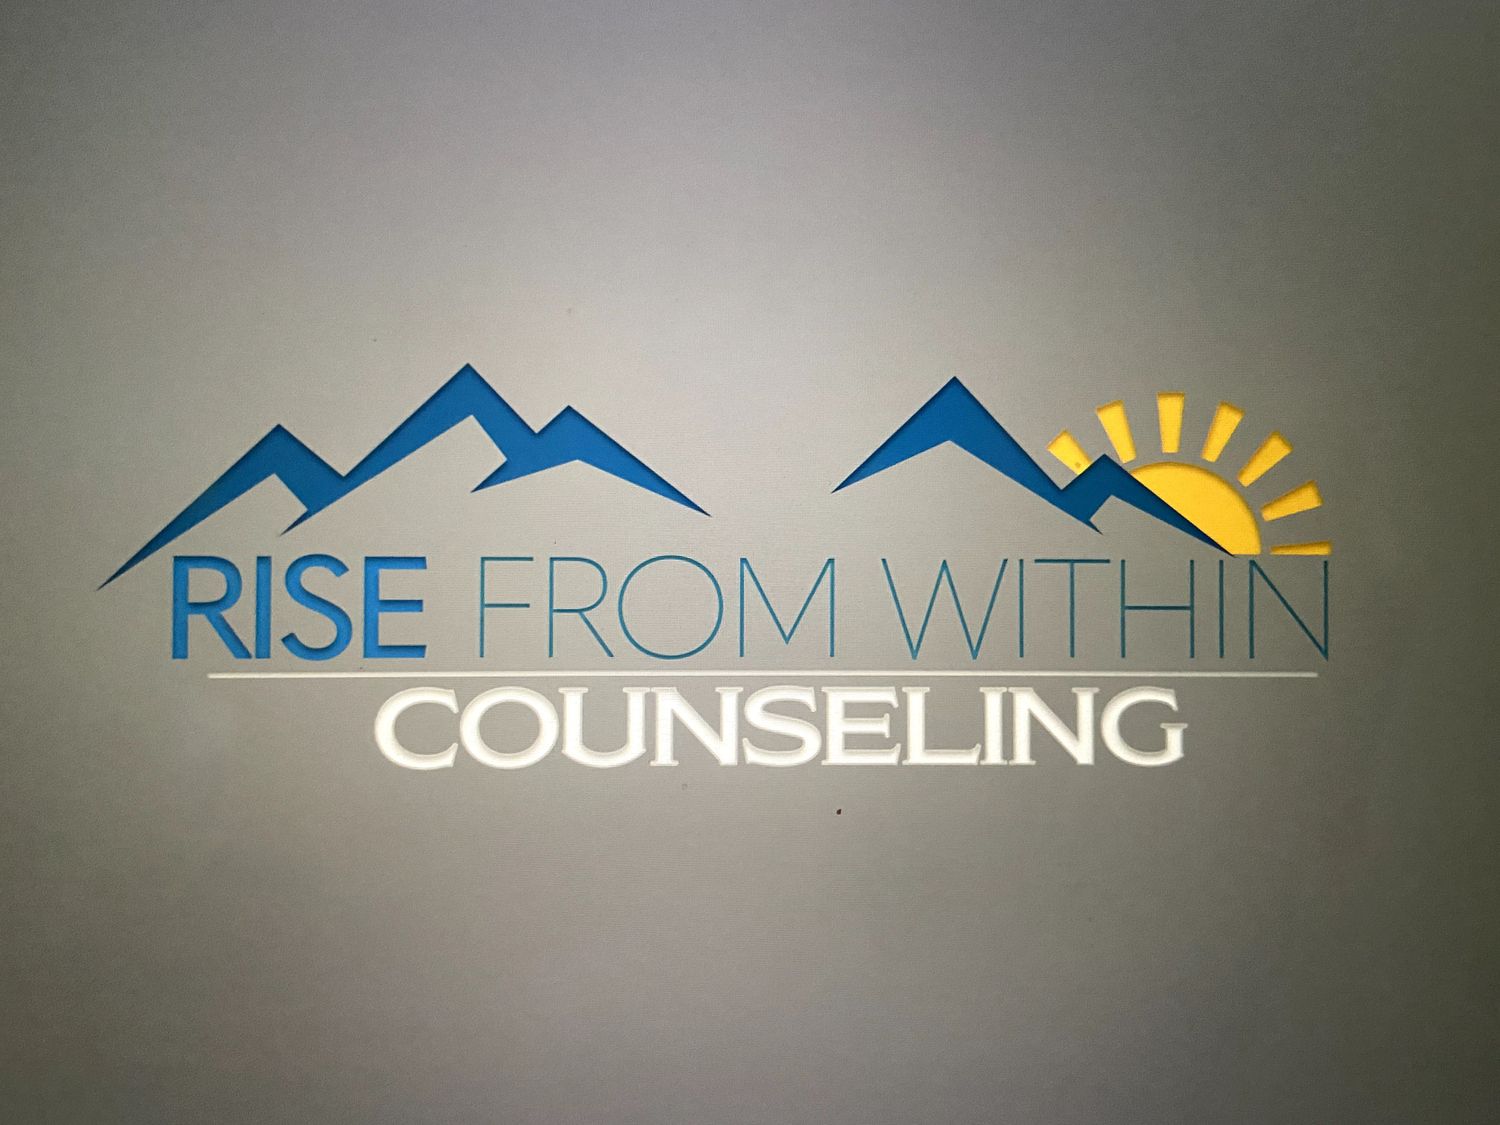 Gallery Photo of risefromwithincounseling.com